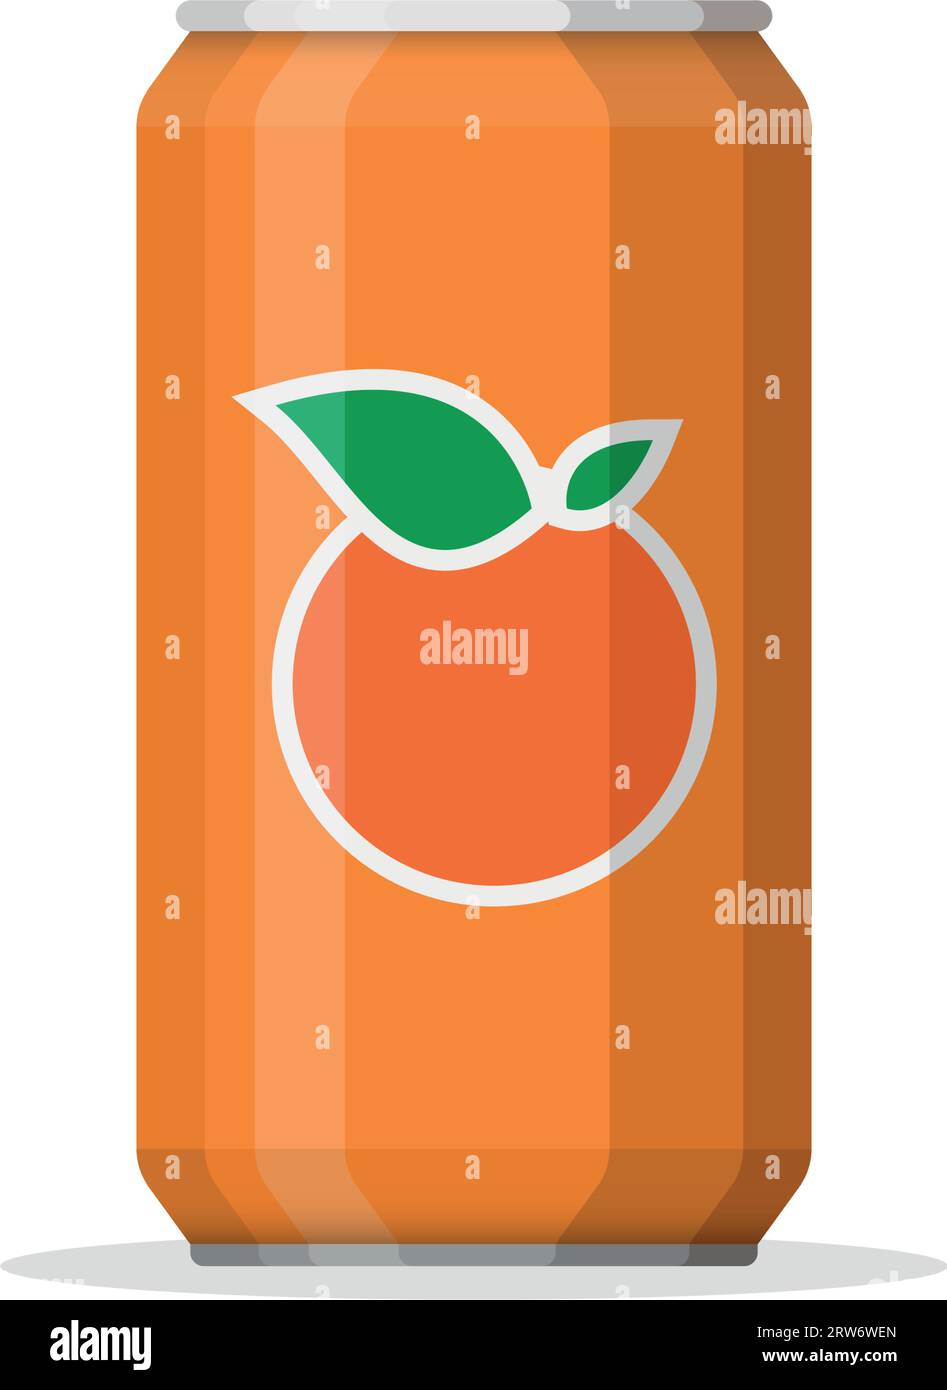 Soda drink icon in flat style. Aluminum can vector illustration on isolated background. Water bottle sign business concept. Stock Vector